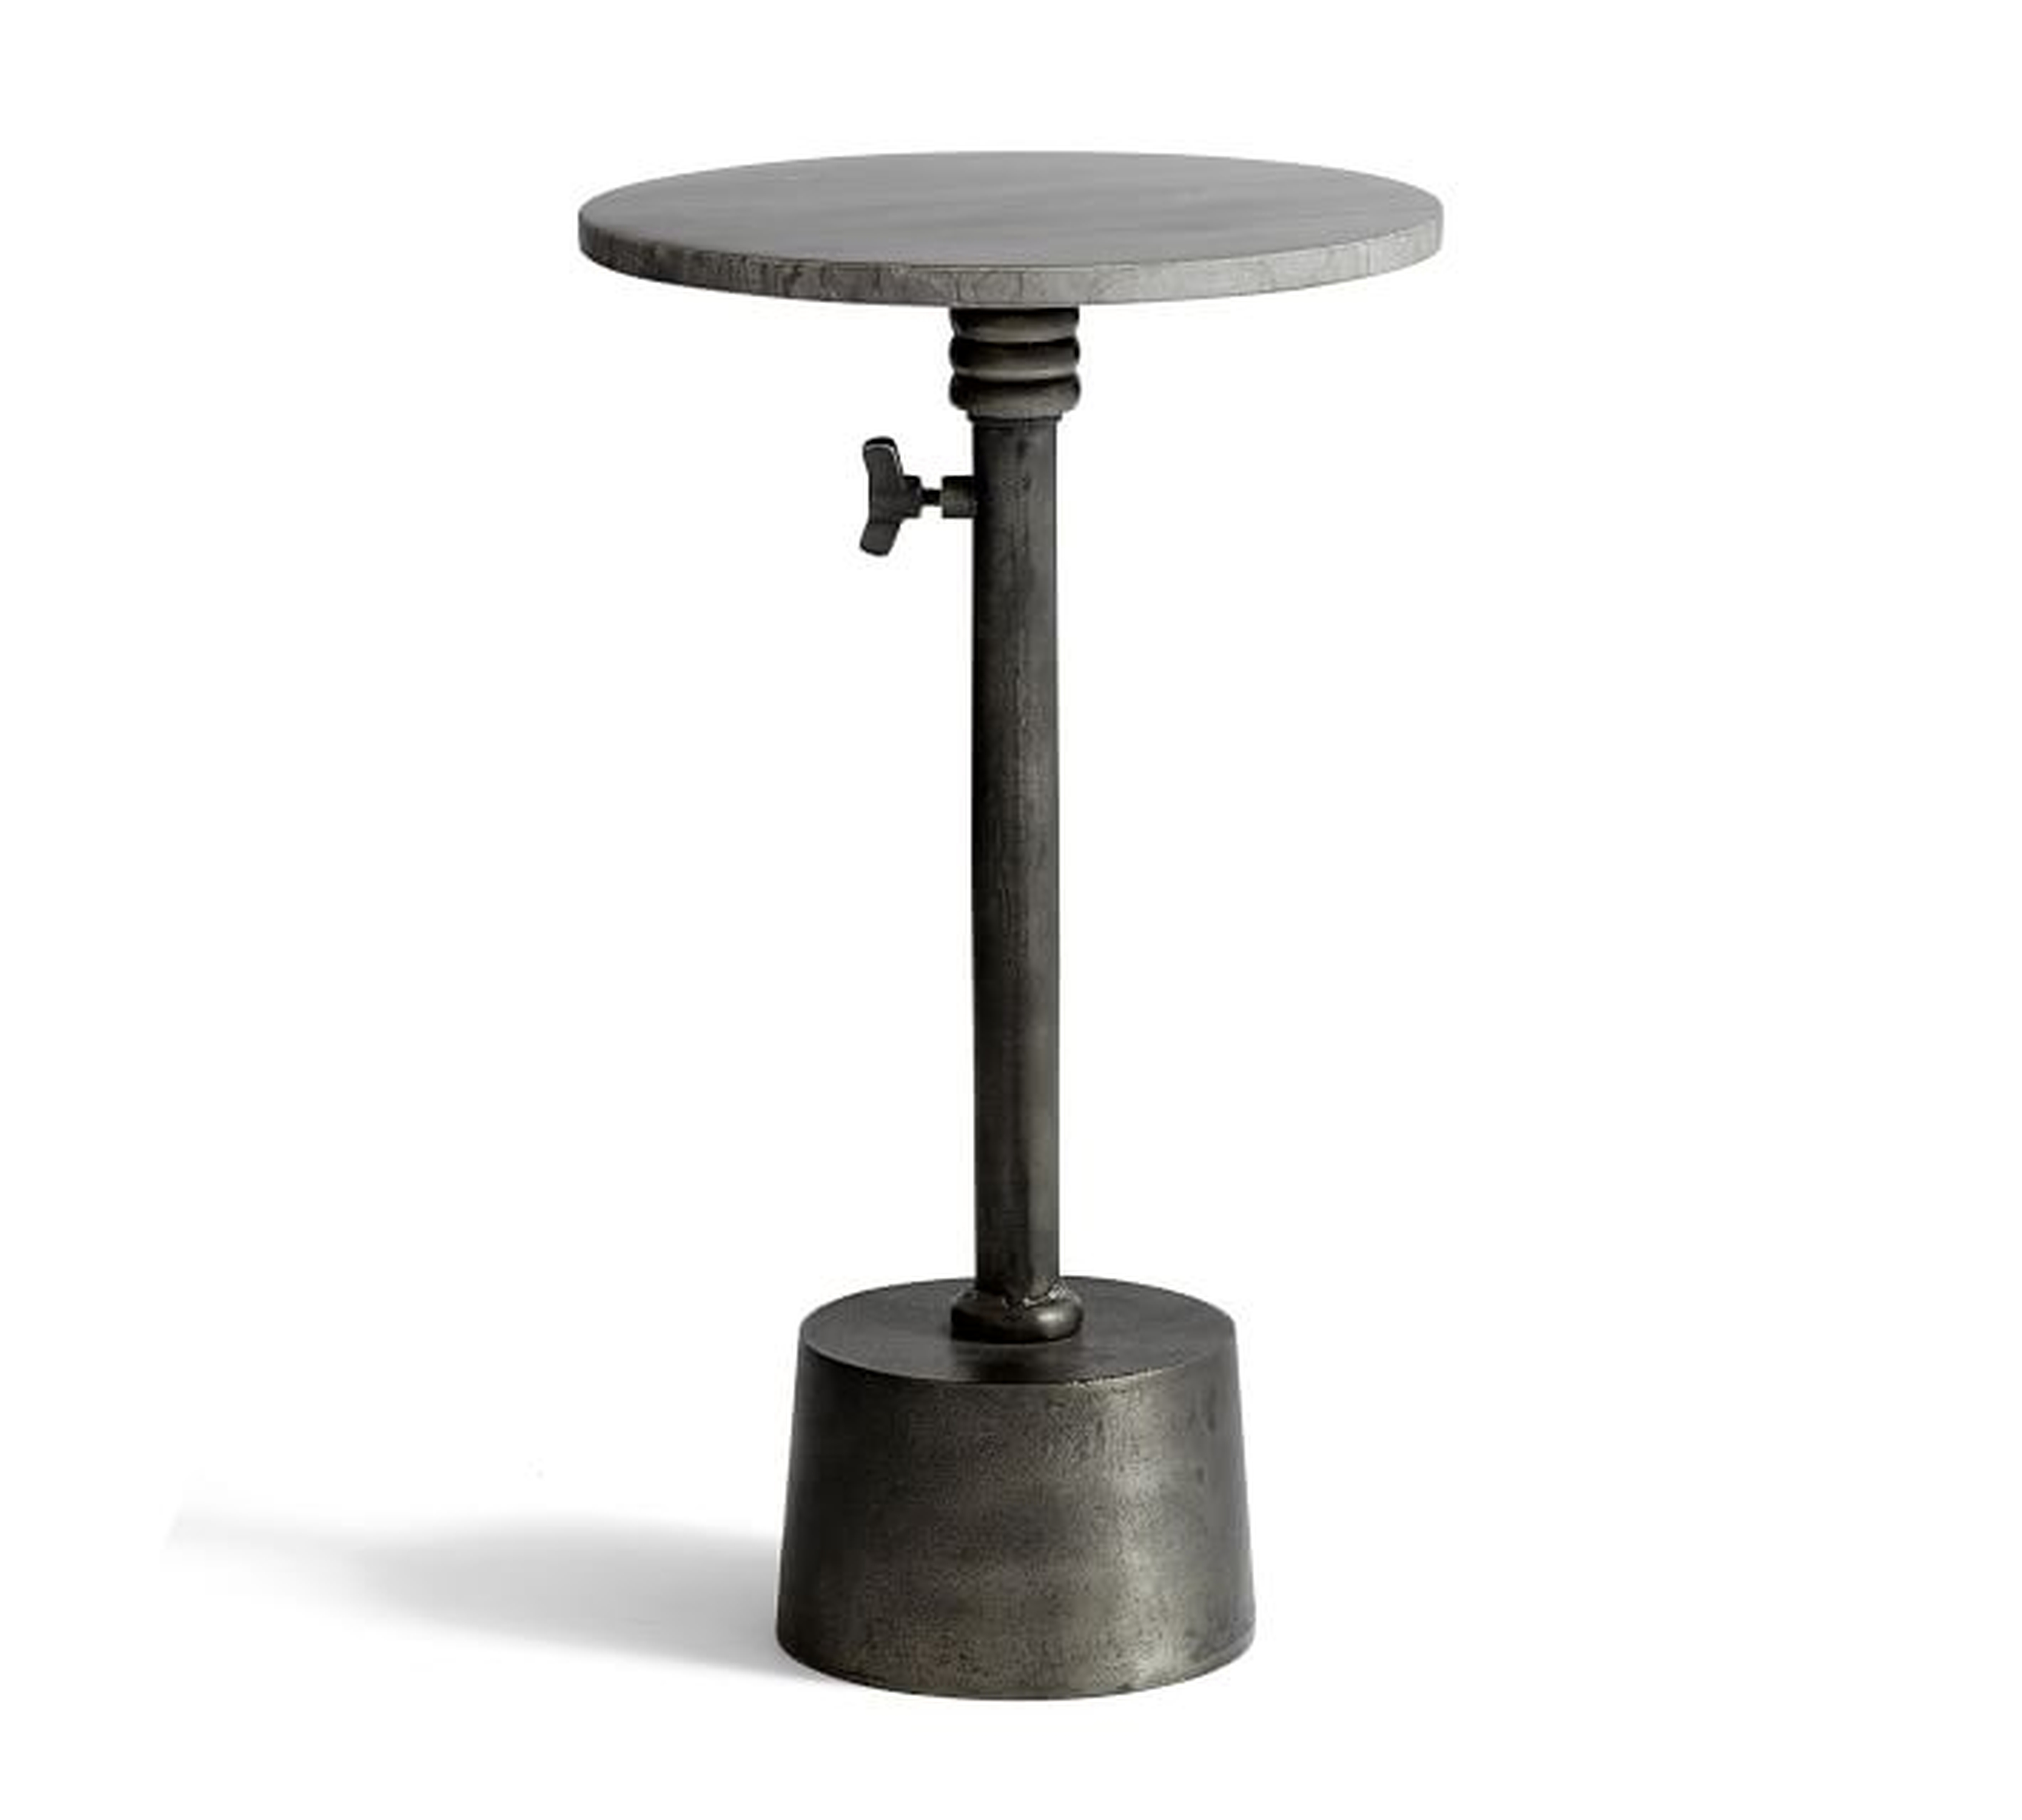 Melvin Round Marble Adjustable Accent Table, Ebony - Pottery Barn